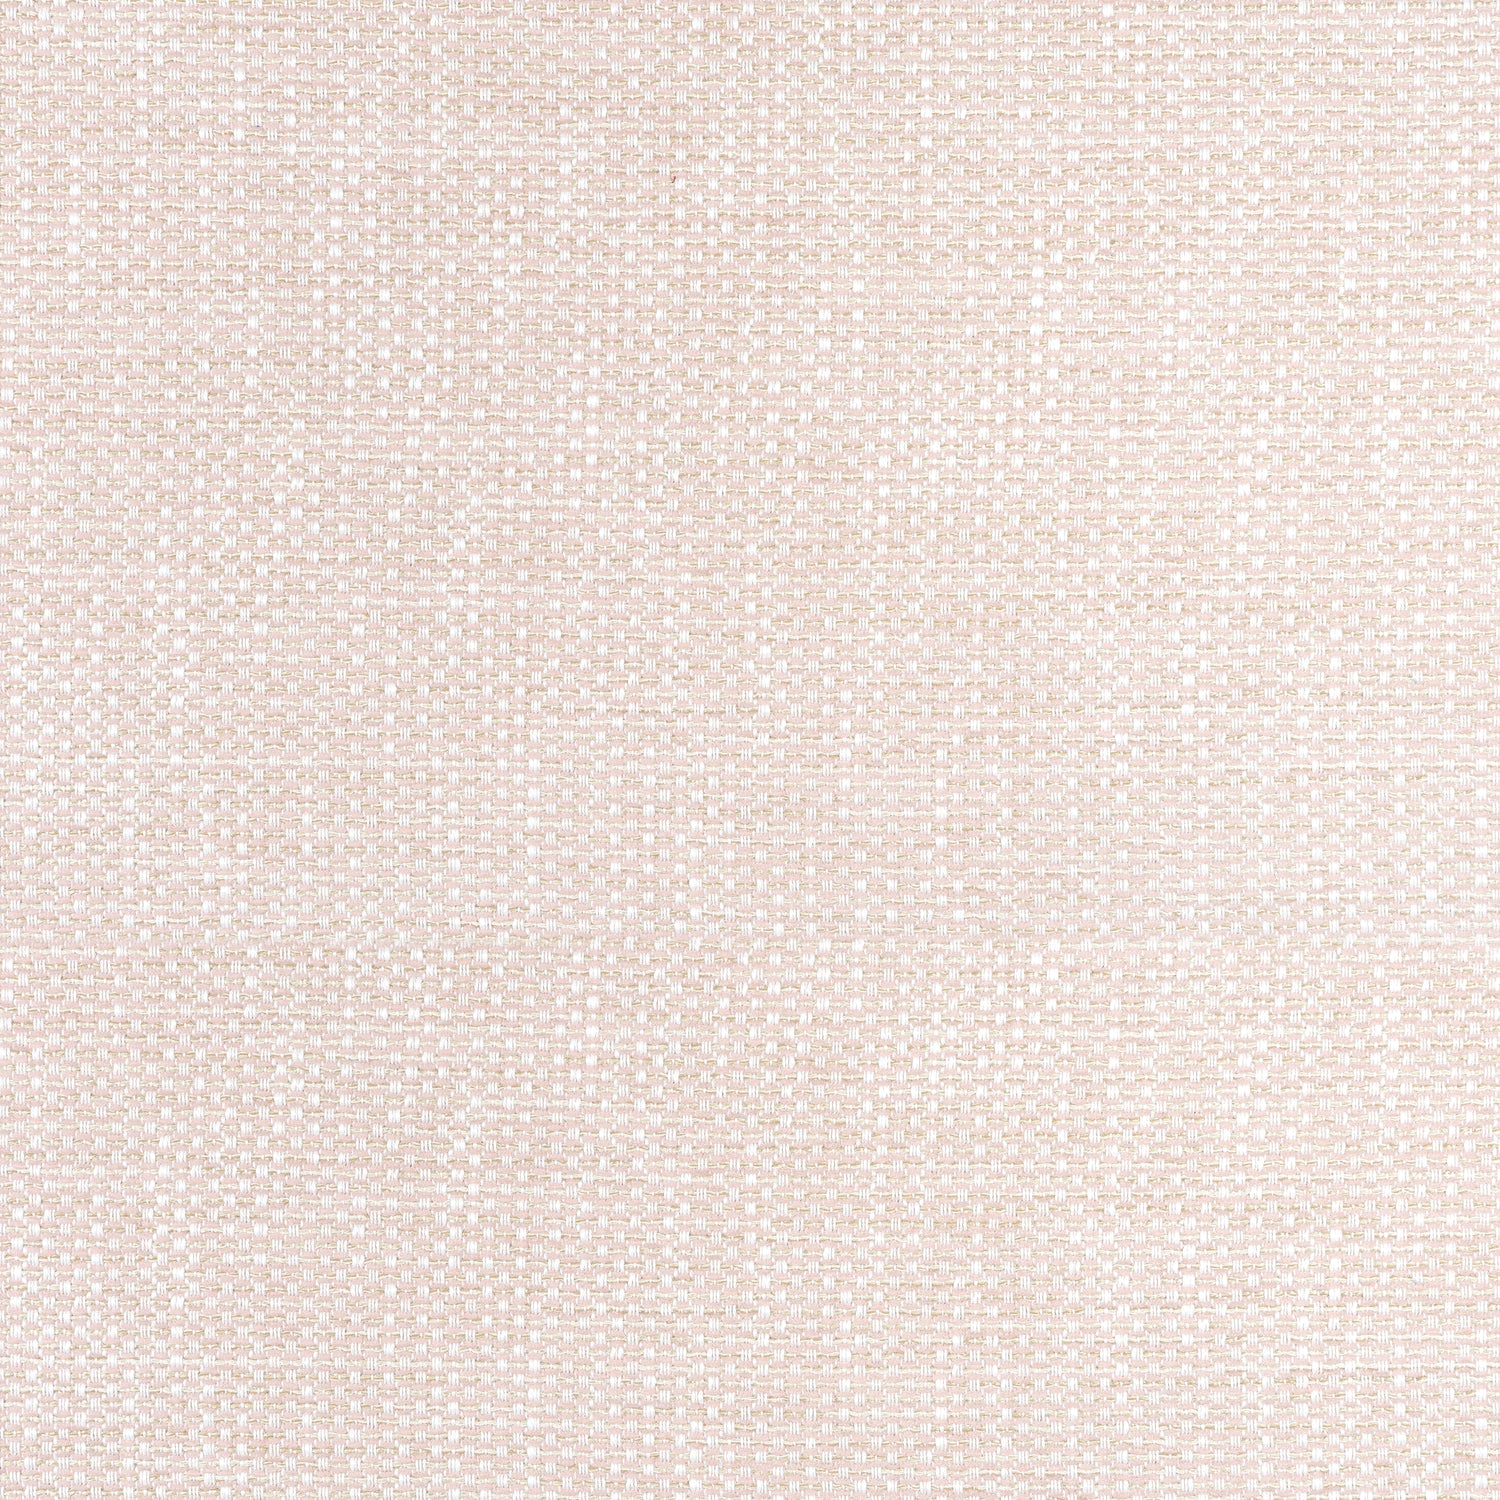 Cascade fabric in blush color - pattern number W75260 - by Thibaut in the Elements collection